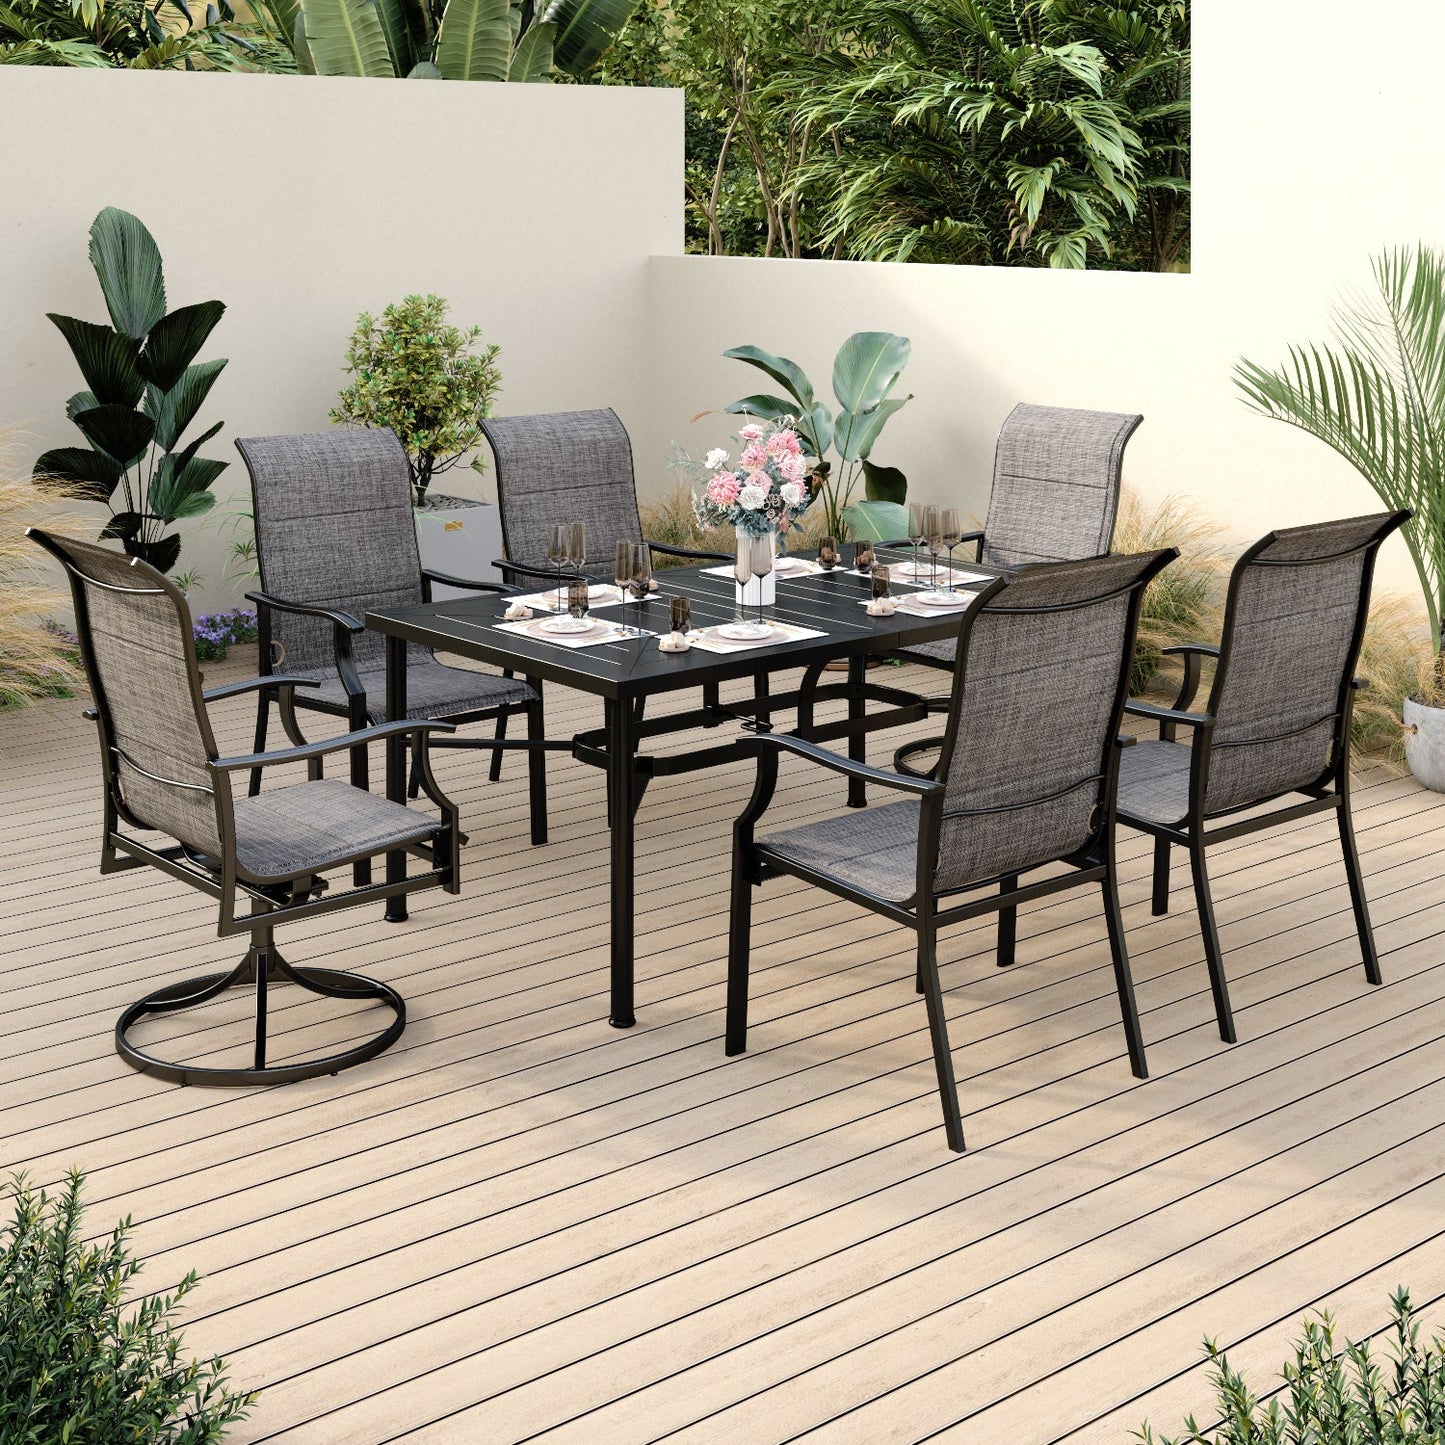 Sophia & William 7 Piece Patio Dining Set 6 Piece Textilene Chairs and 1 Piece Rectangular Dining Wood Table